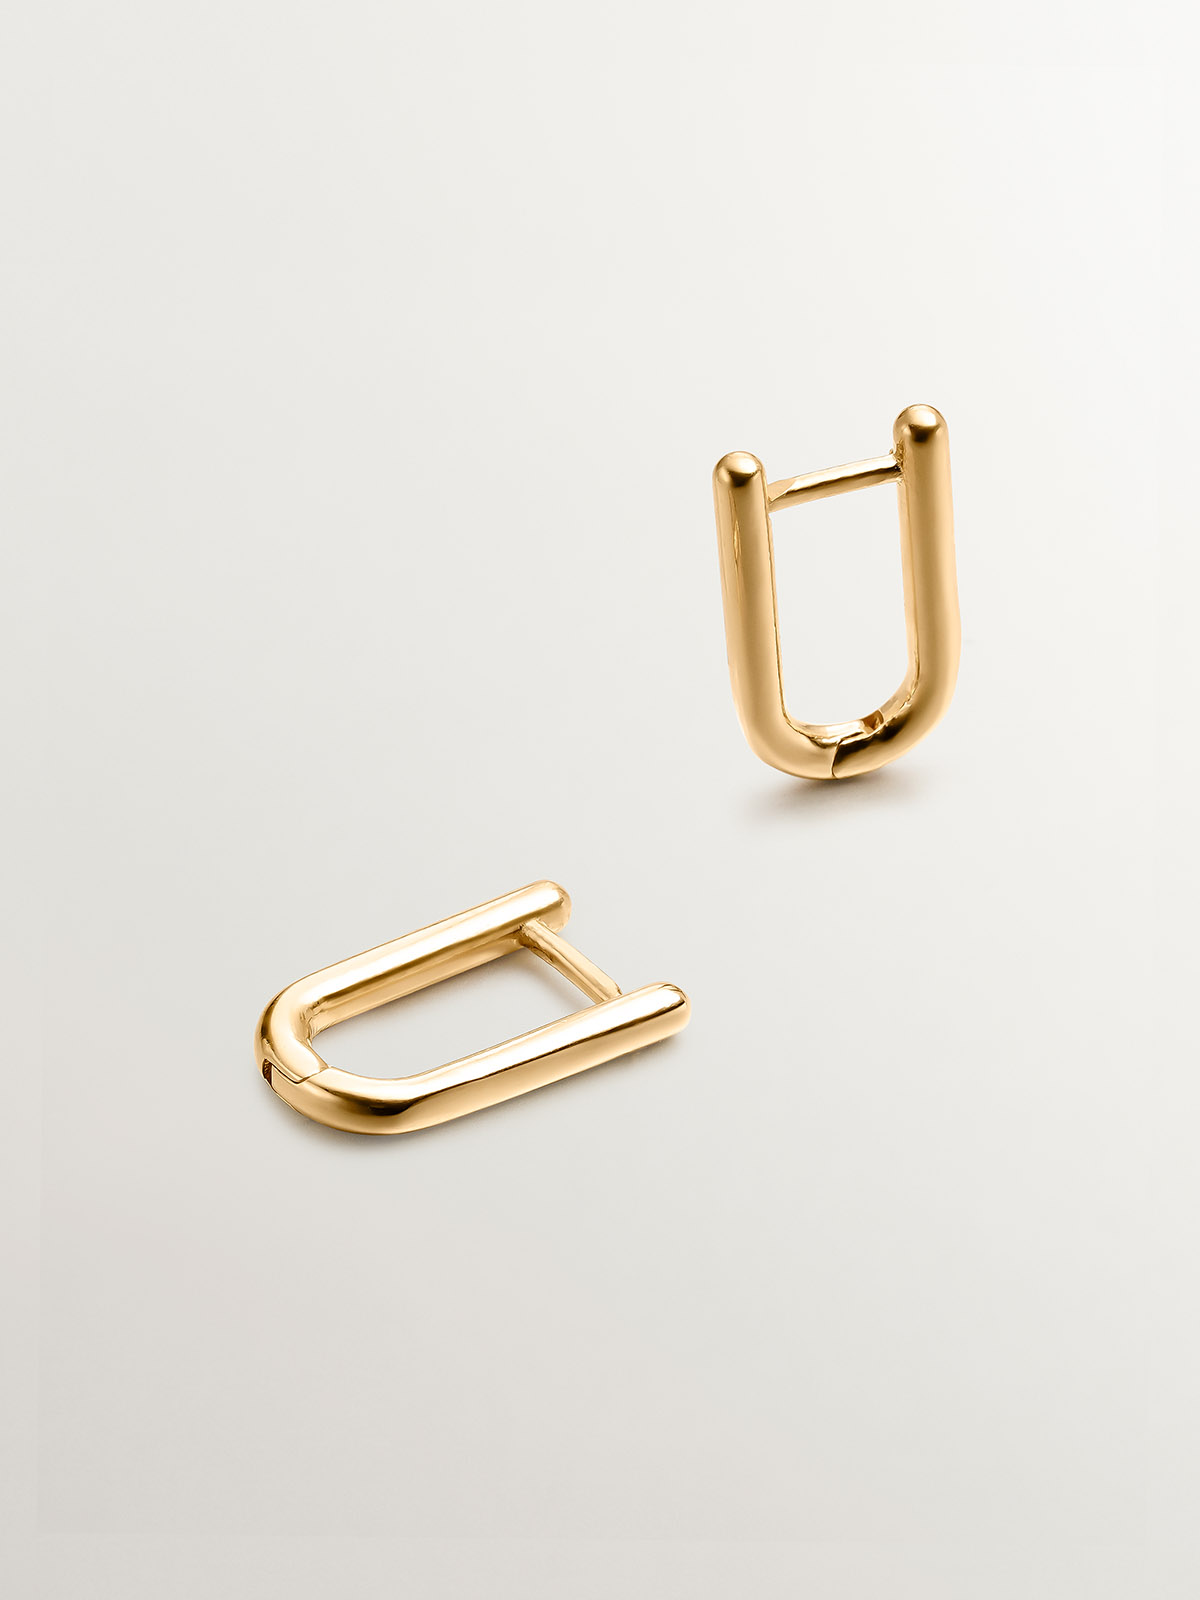 Long silver ring earrings 925 bathed in 18k yellow gold